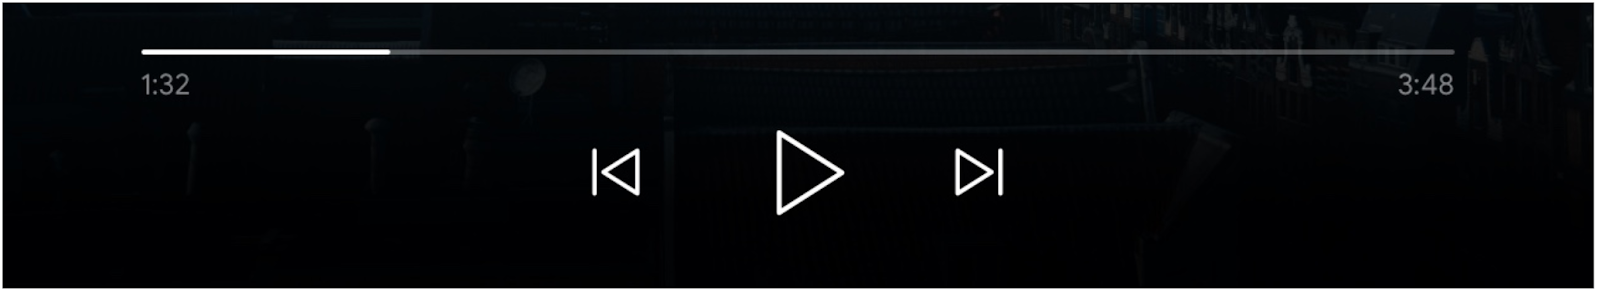 Image of media player controls: progress bar, 'Play' button, and 'Queue previous' and 'Queue next' buttons enabled